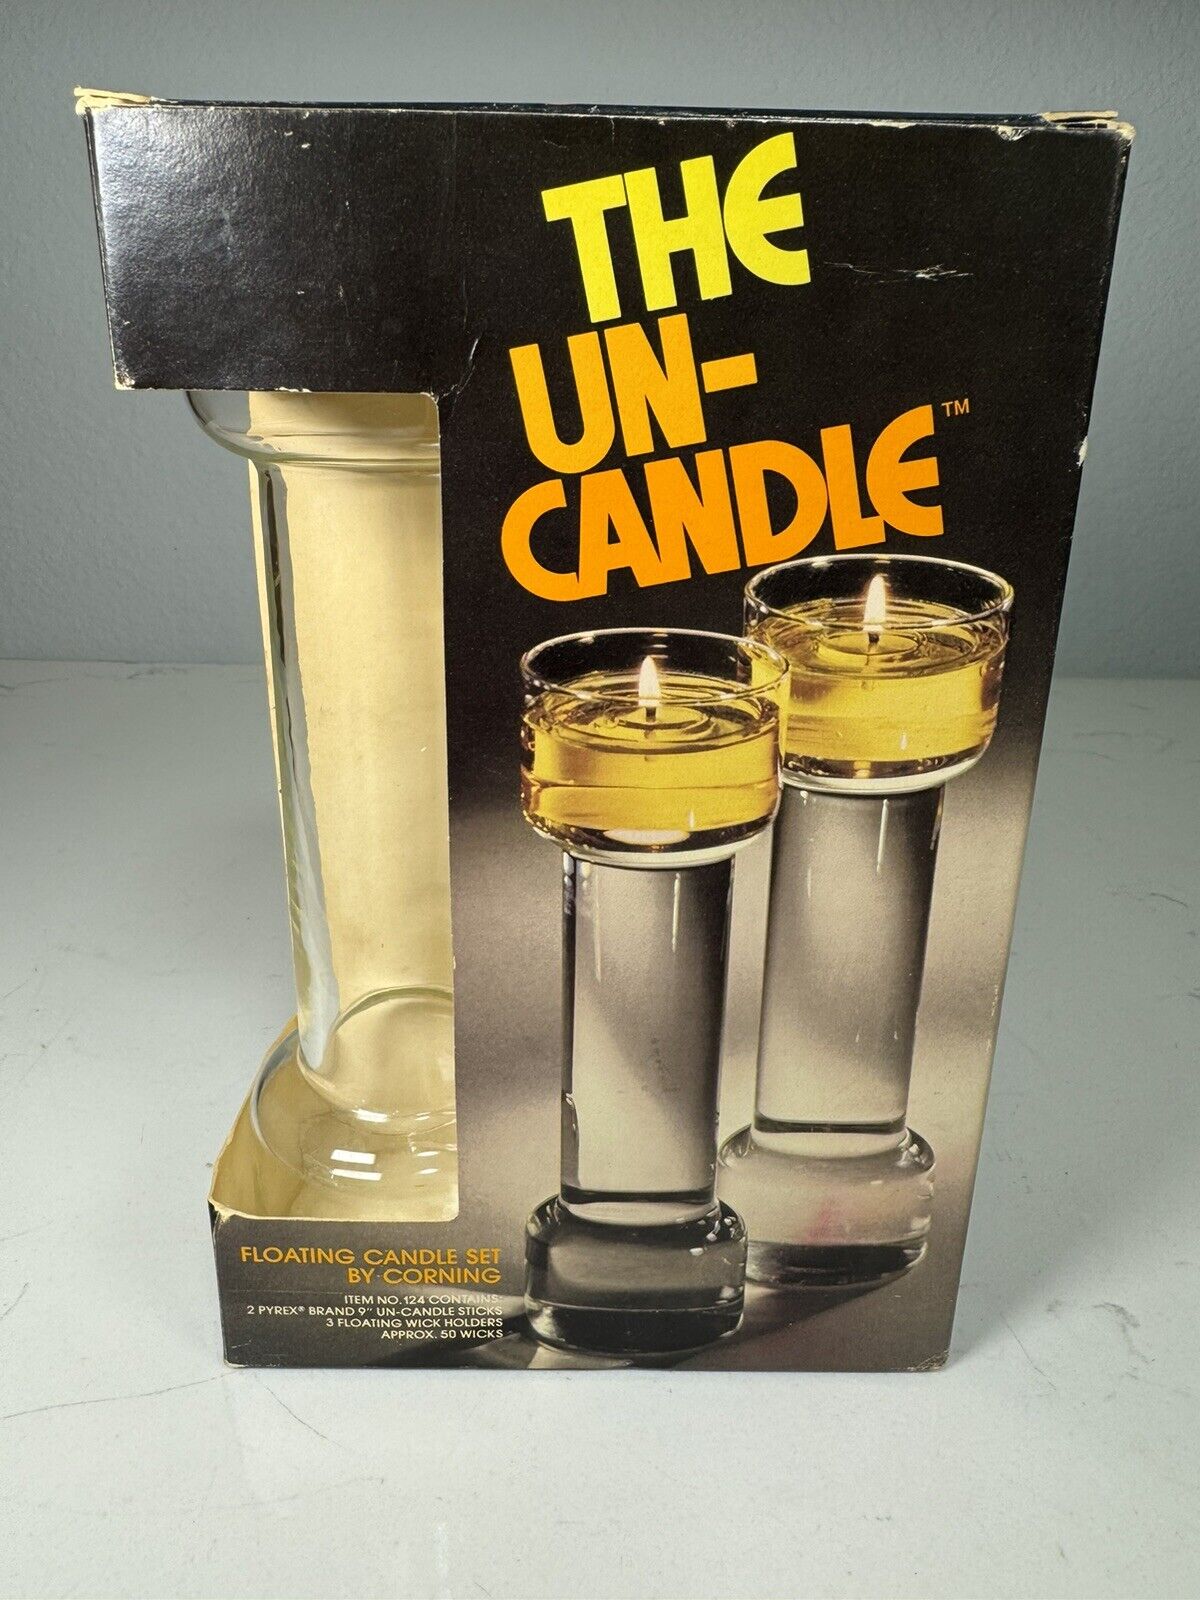 The UN-CANDLE Vintage Floating Candle Set 9” Complete in Box Corning